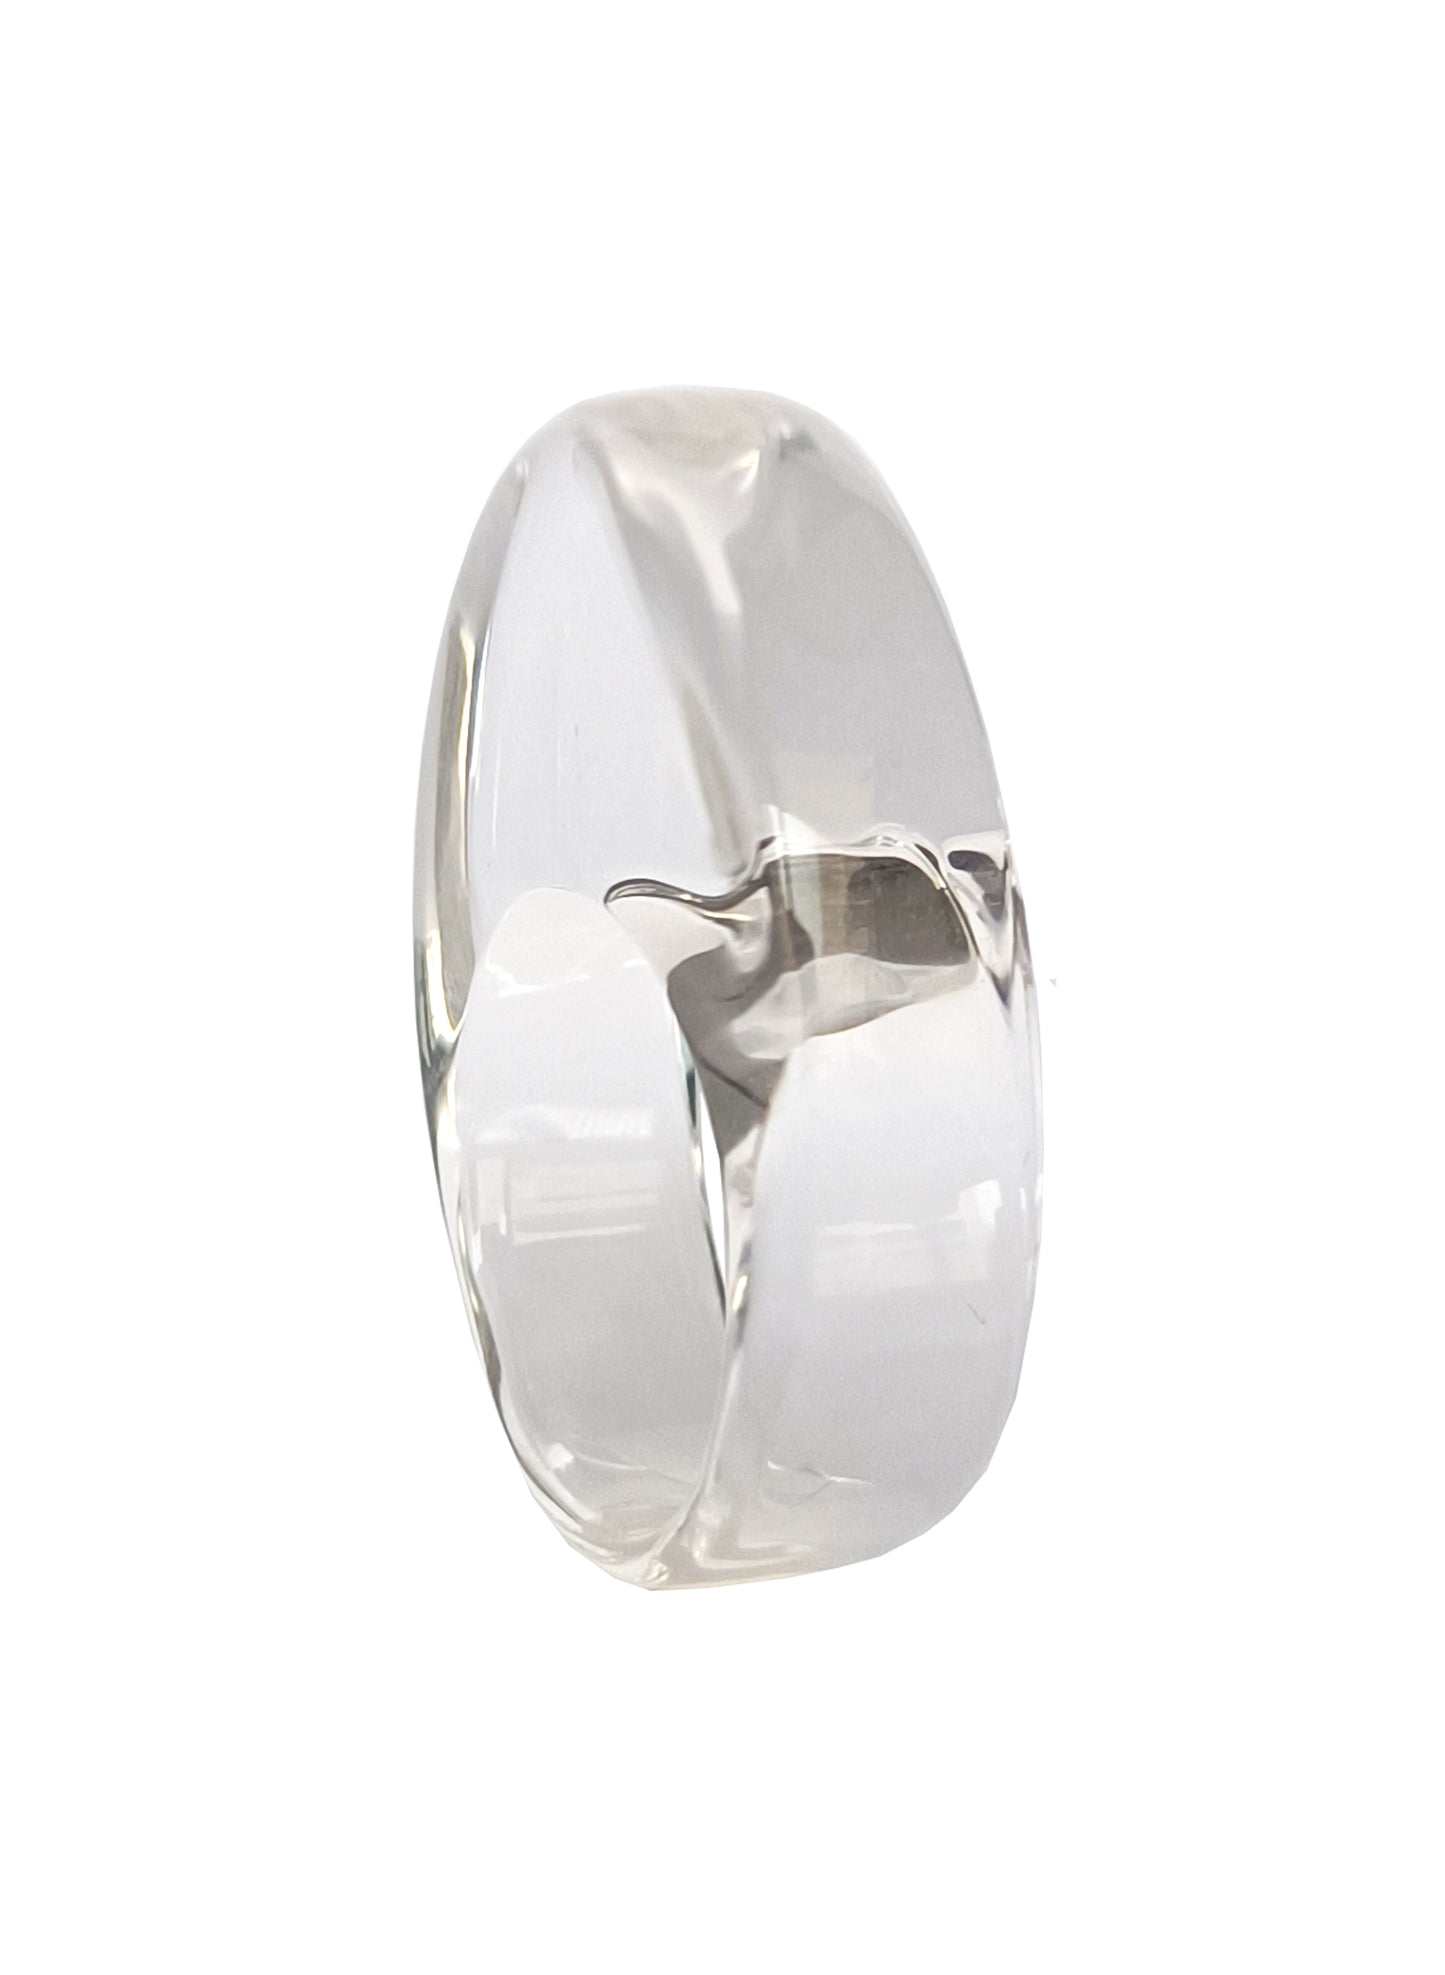 Clear Acrylic Ring, Oval Bold Transparent Ring, Lucite Statement Ring